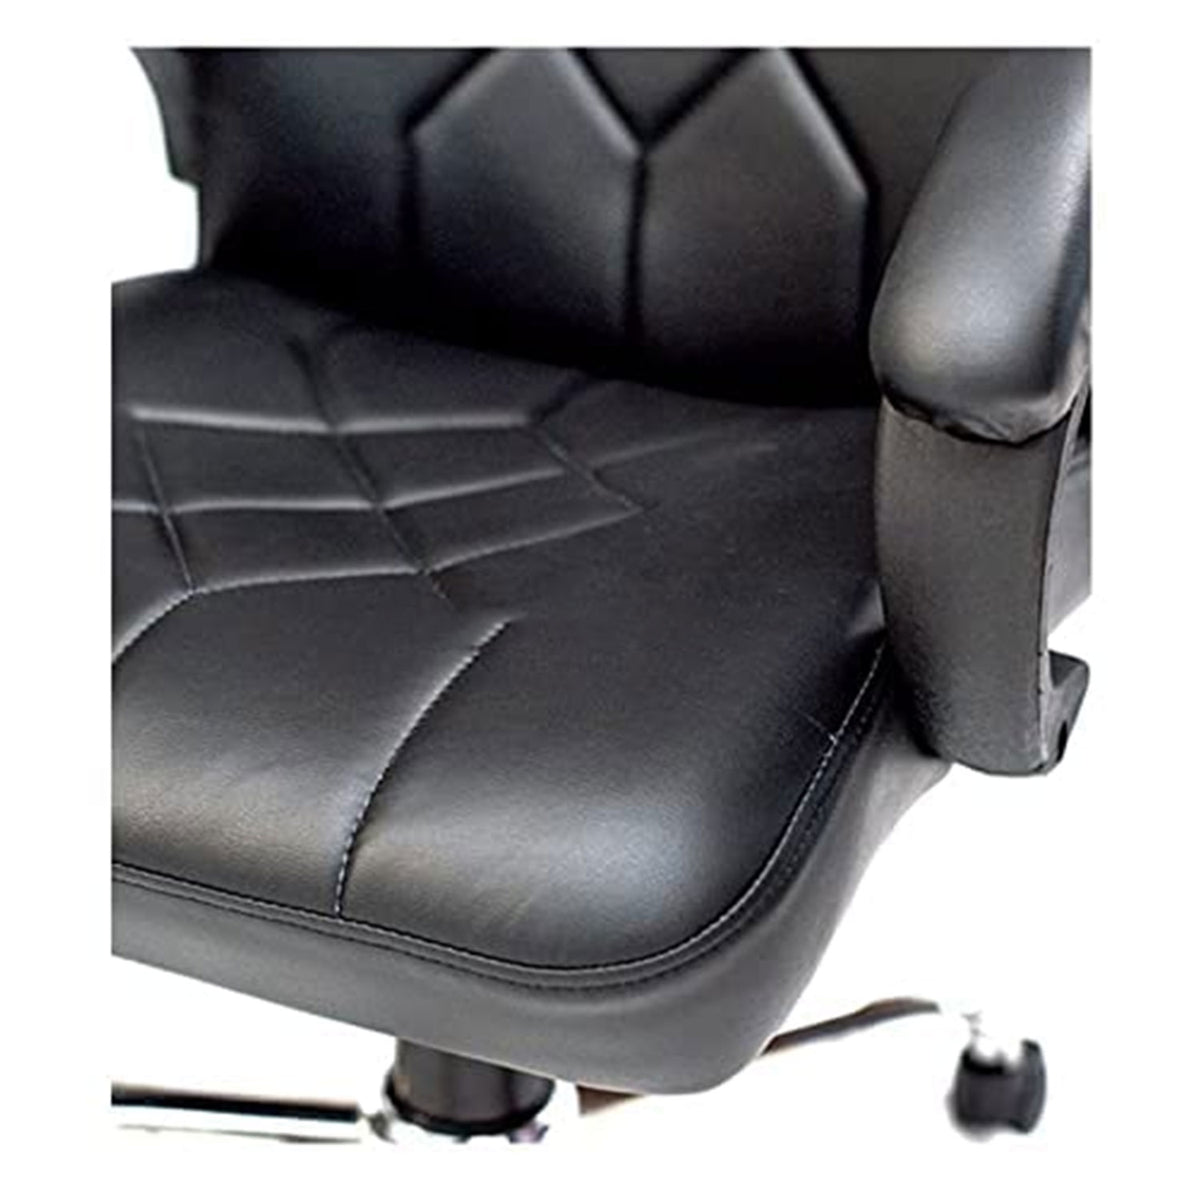 SmileSellers Office Chair for Computer Table,Office Chair/Study Chair/revolving Chair/Computer Chair for Home Work Executive mid Back